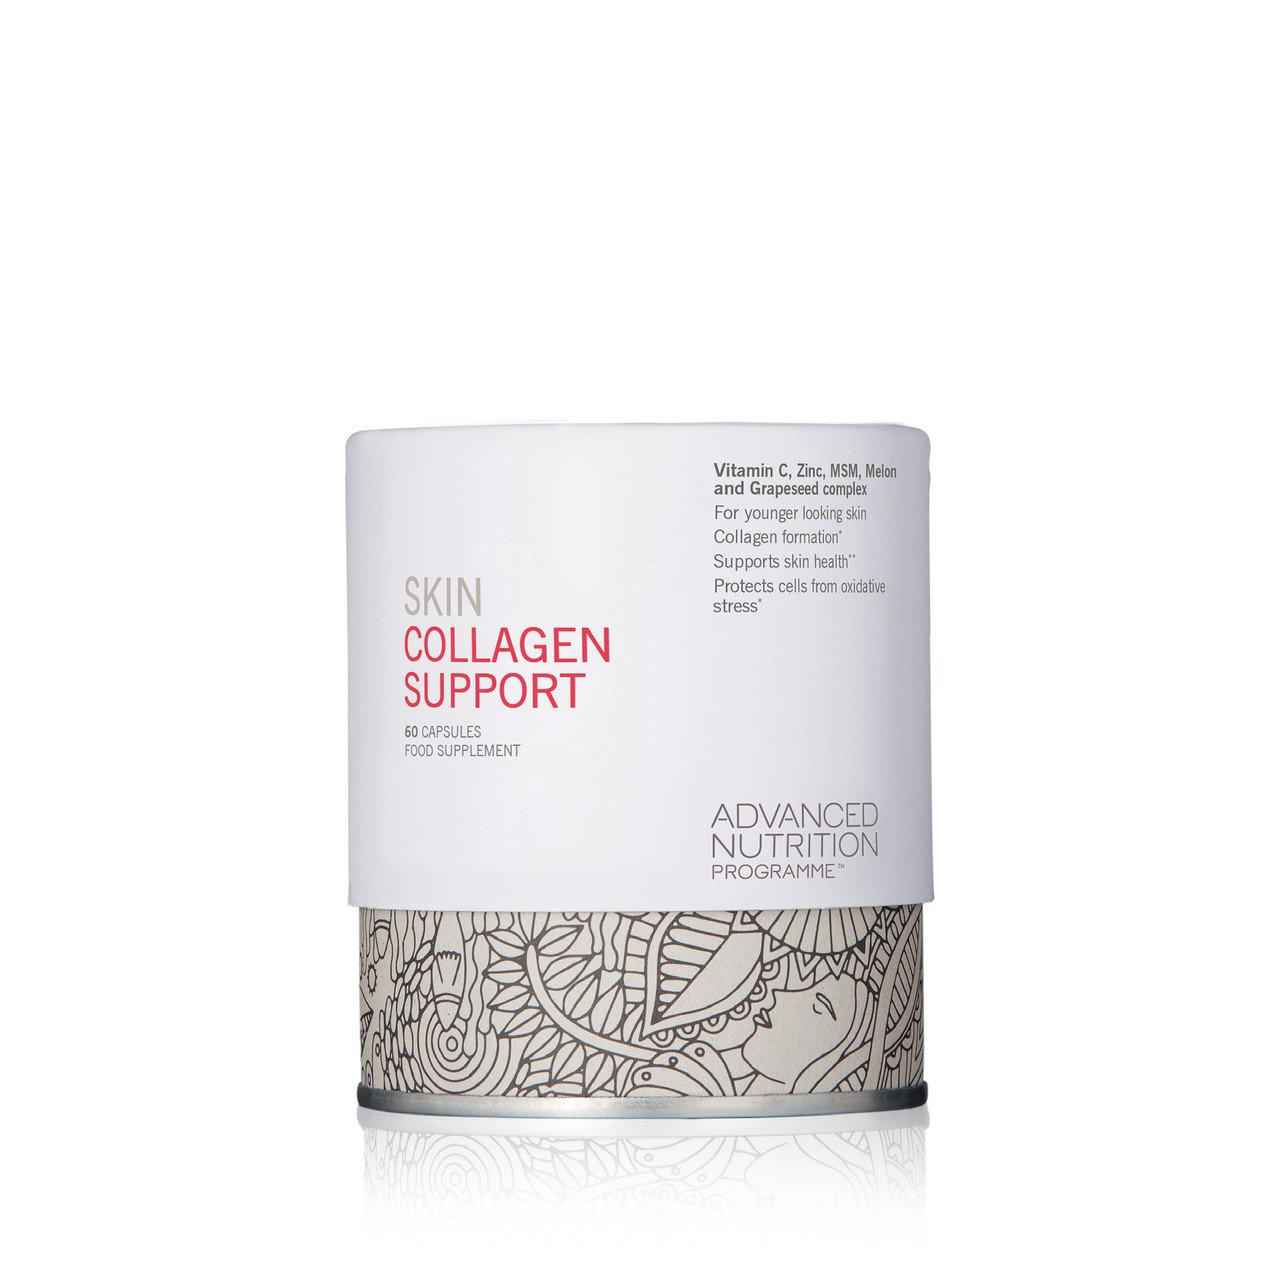 Advanced Nutrition Skin Collagen Support - 60 Capsules product image. 